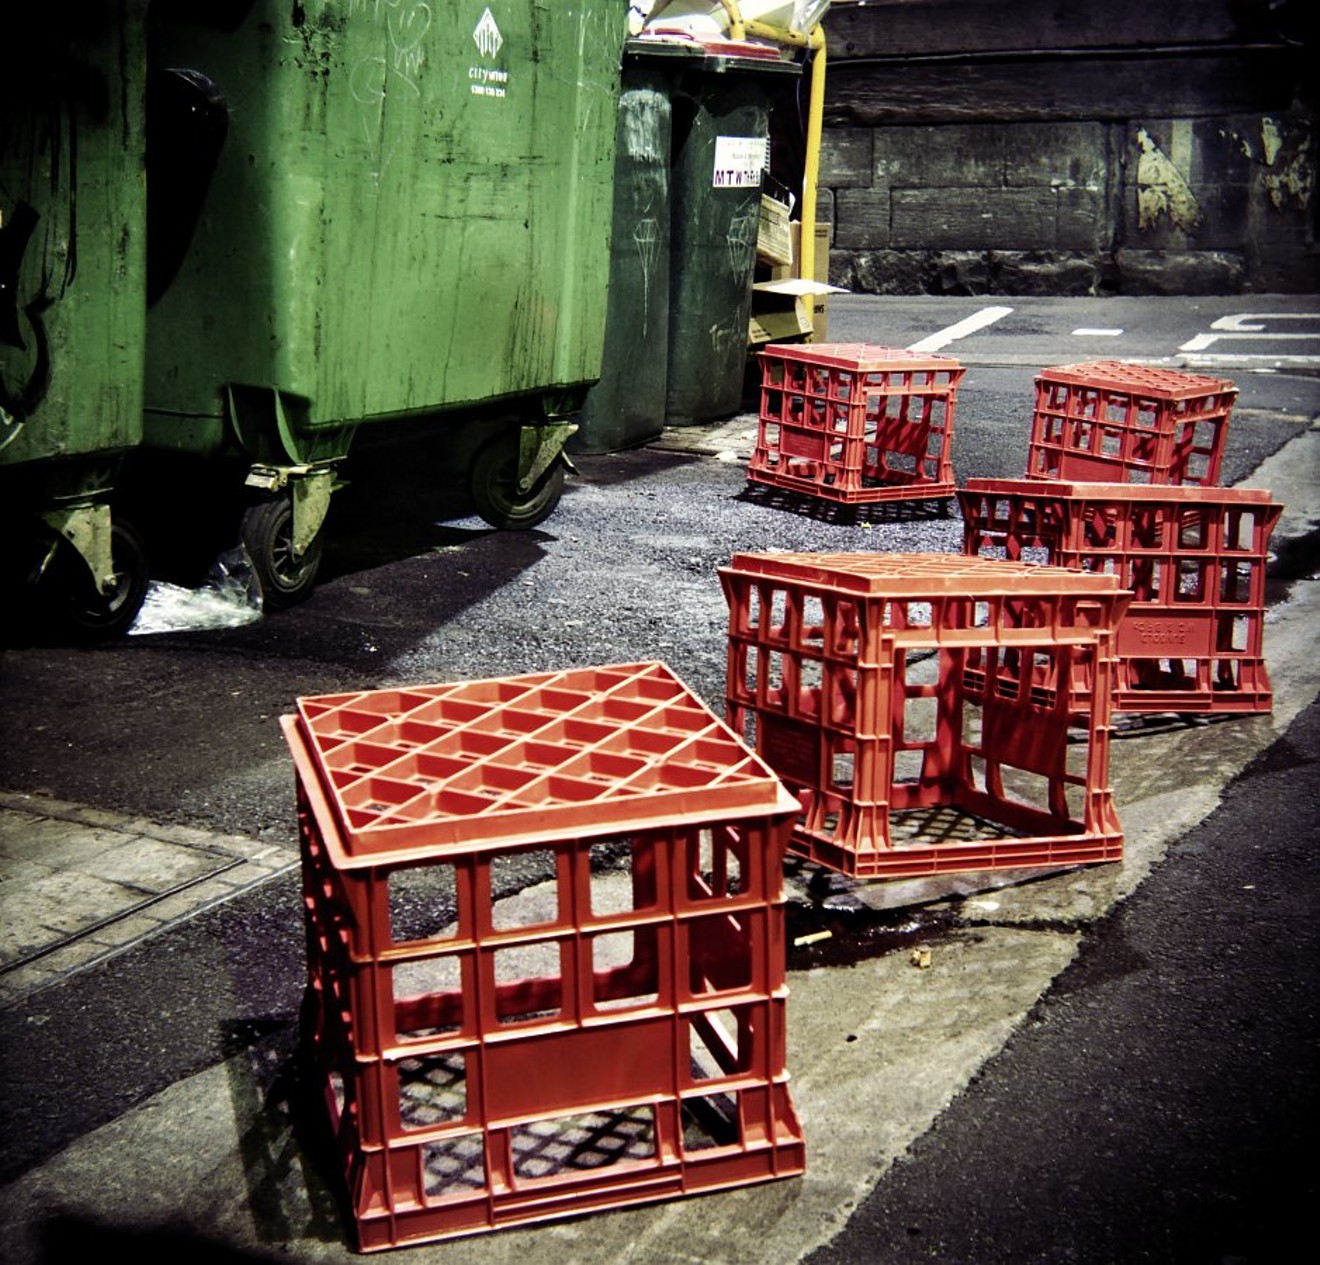 Dairy crates near a dumpster.